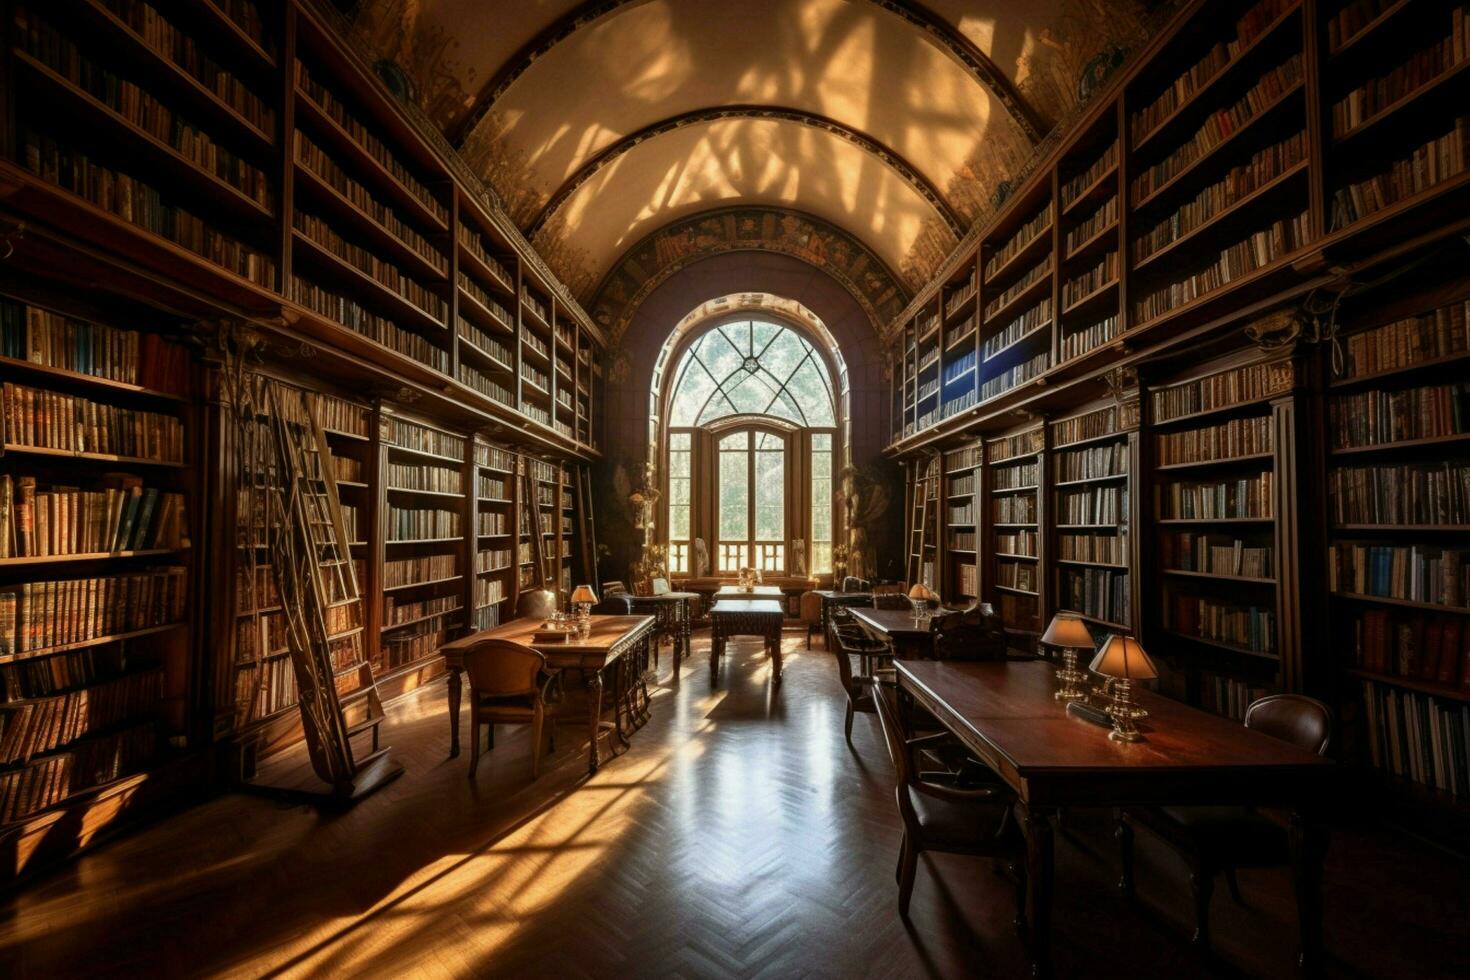 library image hd photo